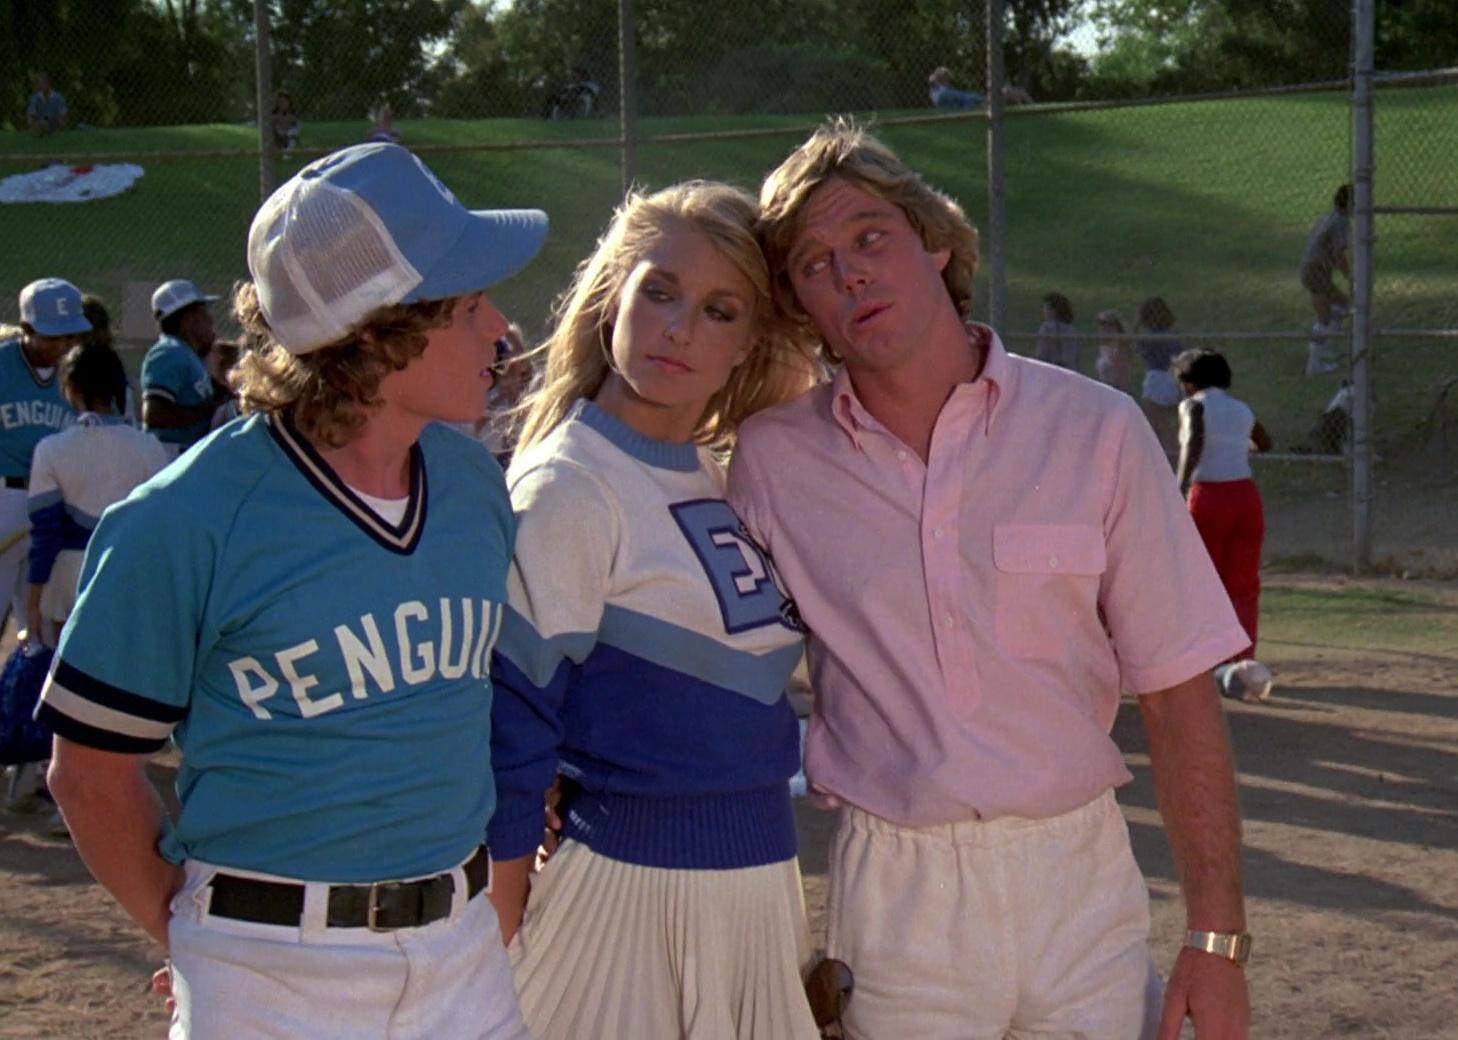 A blonde cheerleader in between a baseball player and a blonde guy in a pink button down shirt on the baseball field.